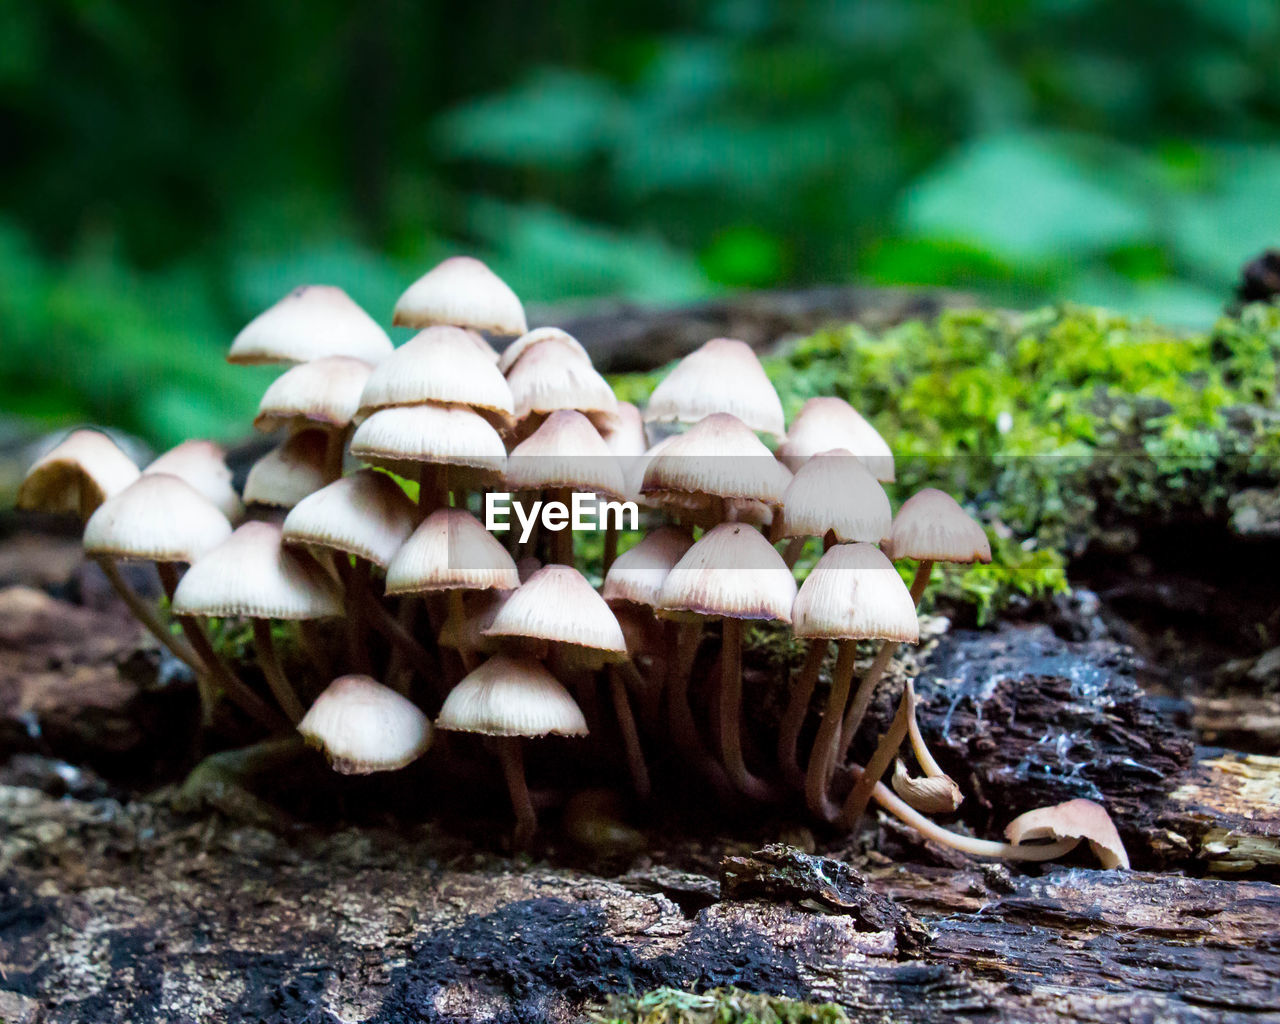 CLOSE-UP OF MUSHROOMS ON WOOD IN FOREST